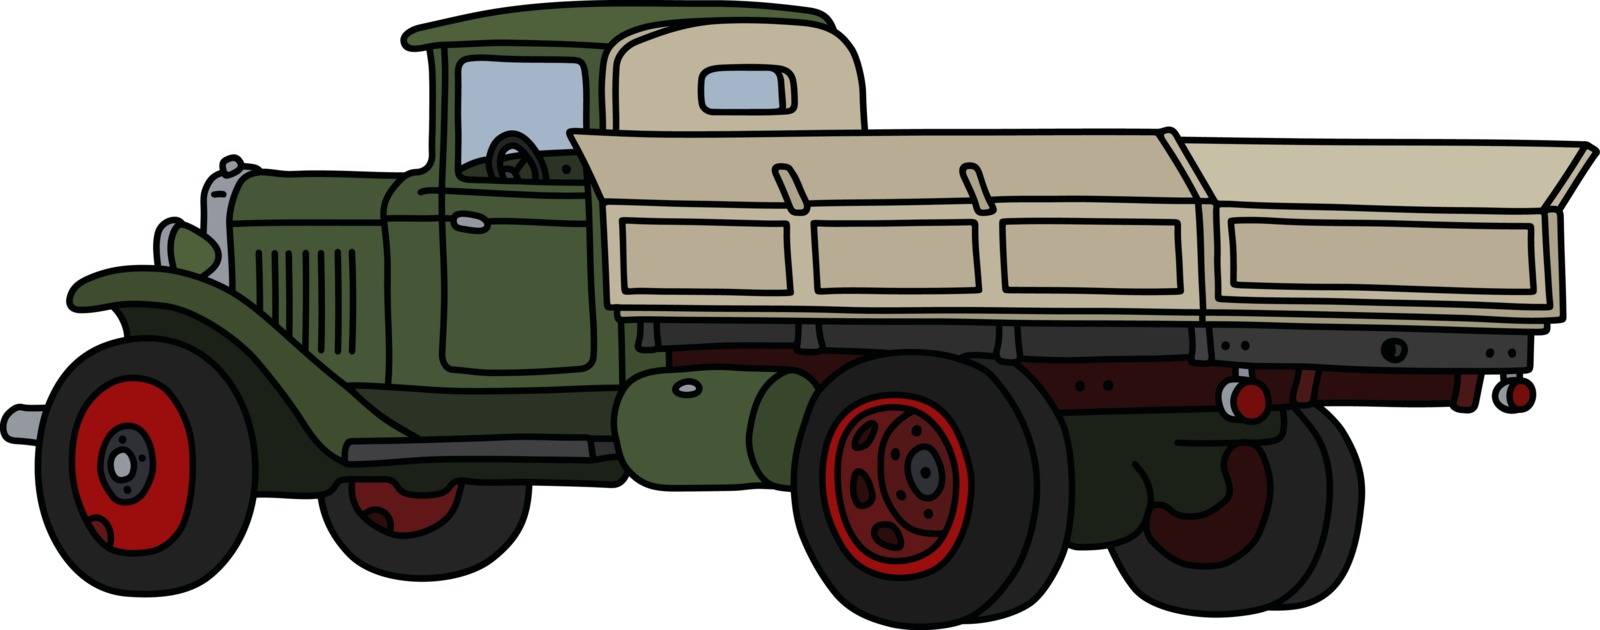 The vectorized hand drawing of a classic green lorry